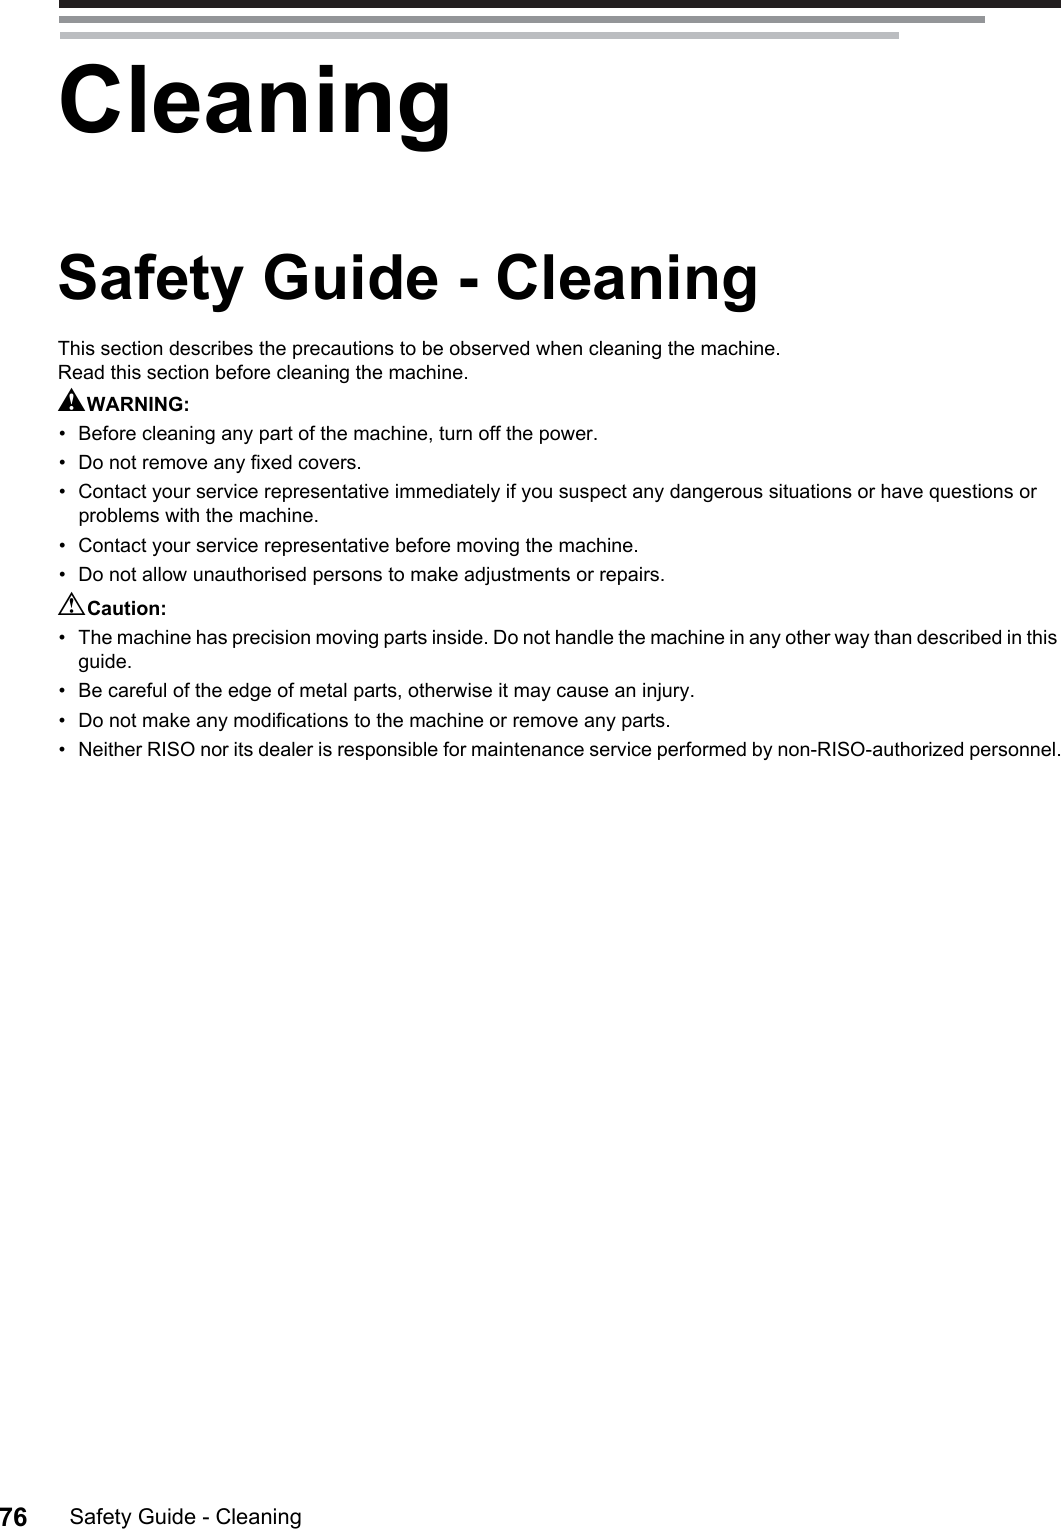 Safety Guide - Cleaning76CleaningSafety Guide - CleaningThis section describes the precautions to be observed when cleaning the machine.Read this section before cleaning the machine.AWARNING:• Before cleaning any part of the machine, turn off the power.• Do not remove any fixed covers.• Contact your service representative immediately if you suspect any dangerous situations or have questions or problems with the machine.• Contact your service representative before moving the machine.• Do not allow unauthorised persons to make adjustments or repairs.BCaution:• The machine has precision moving parts inside. Do not handle the machine in any other way than described in this guide.• Be careful of the edge of metal parts, otherwise it may cause an injury.• Do not make any modifications to the machine or remove any parts.• Neither RISO nor its dealer is responsible for maintenance service performed by non-RISO-authorized personnel.